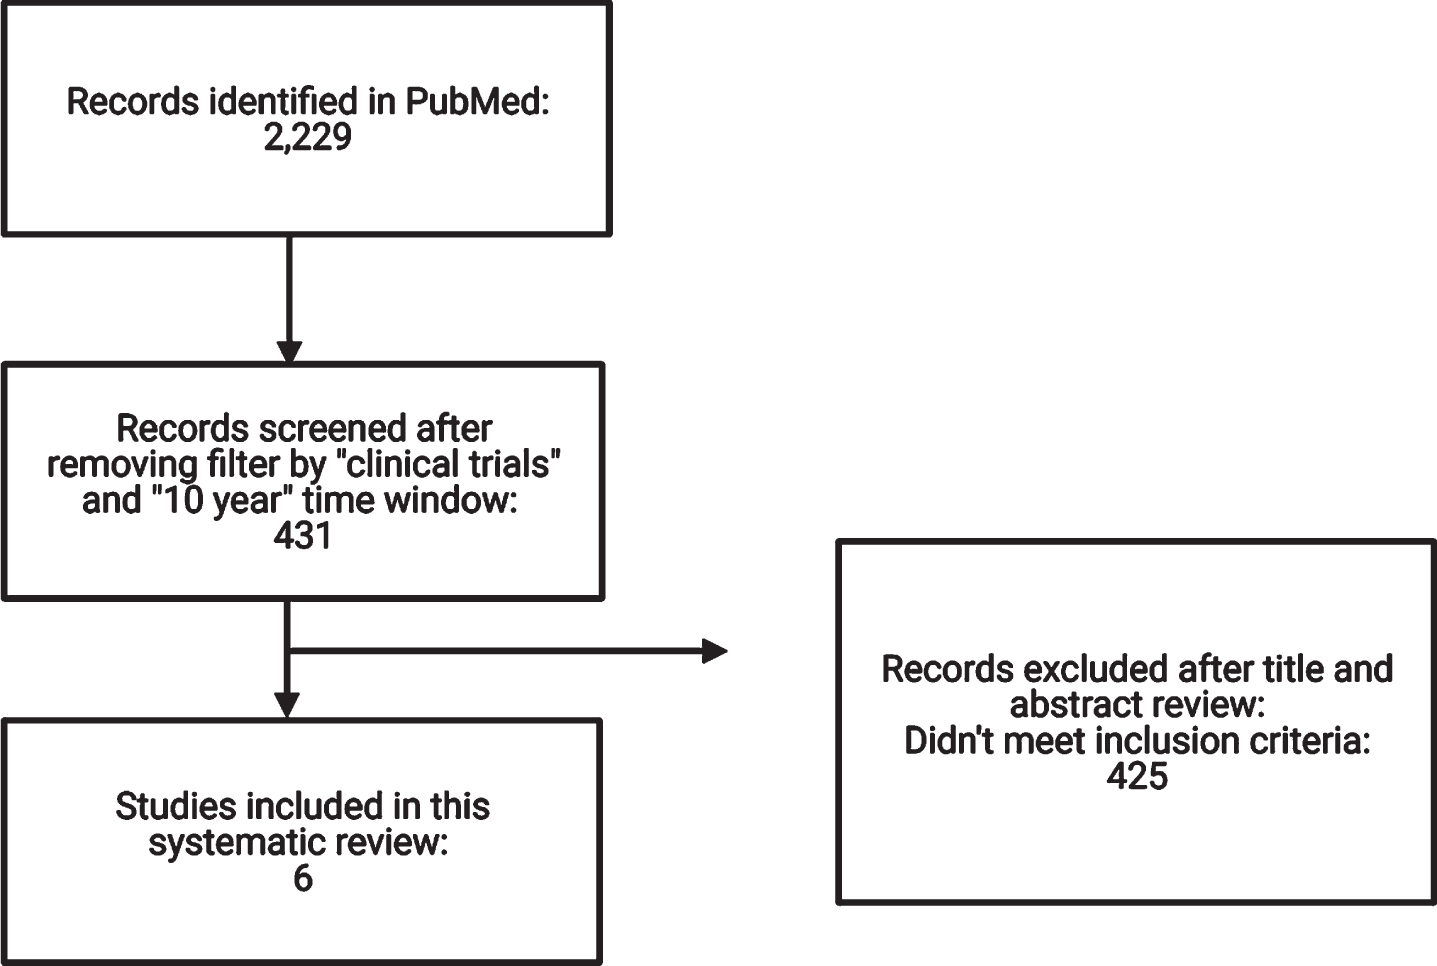 Preferred reporting items for systematic reviews and meta-analysis (PRISMA) flow diagram.